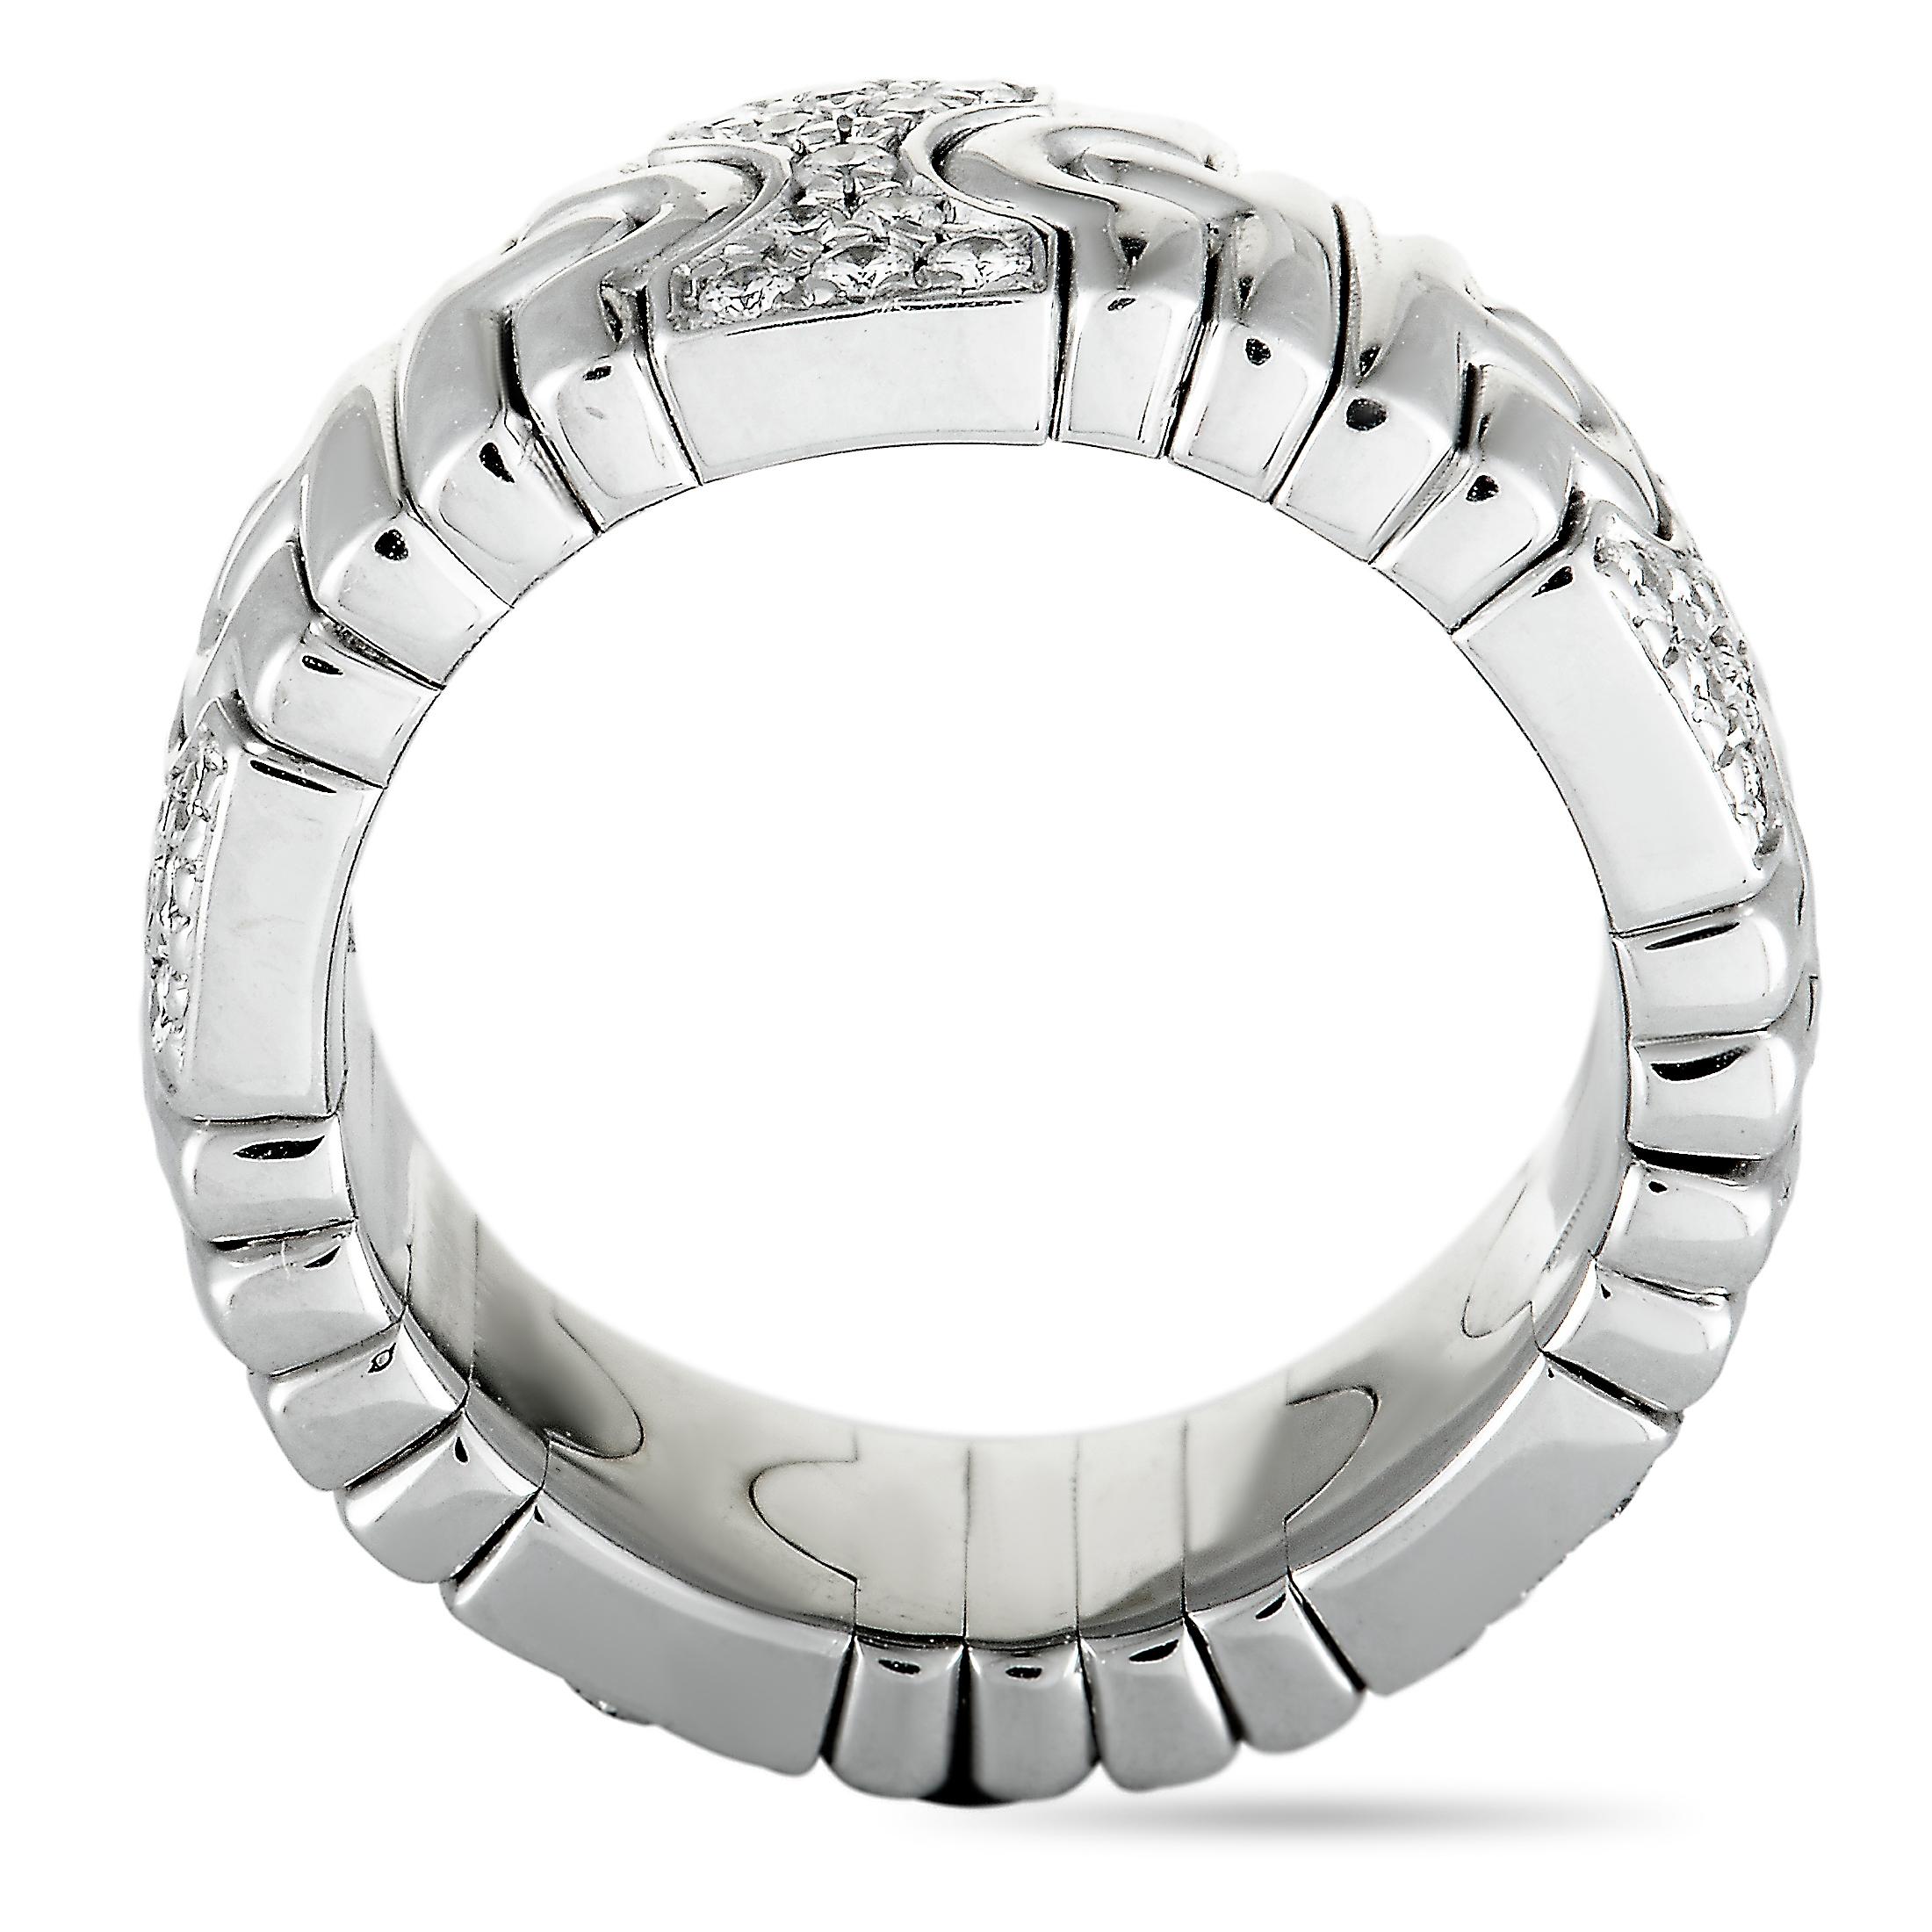 Created for the exquisite “Parentesi” collection by Bvlgari, this extraordinary ring boasts an exceptionally prestigious design that is topped off with a plethora of dazzling diamonds. The ring is beautifully made of 18K white gold and it weighs